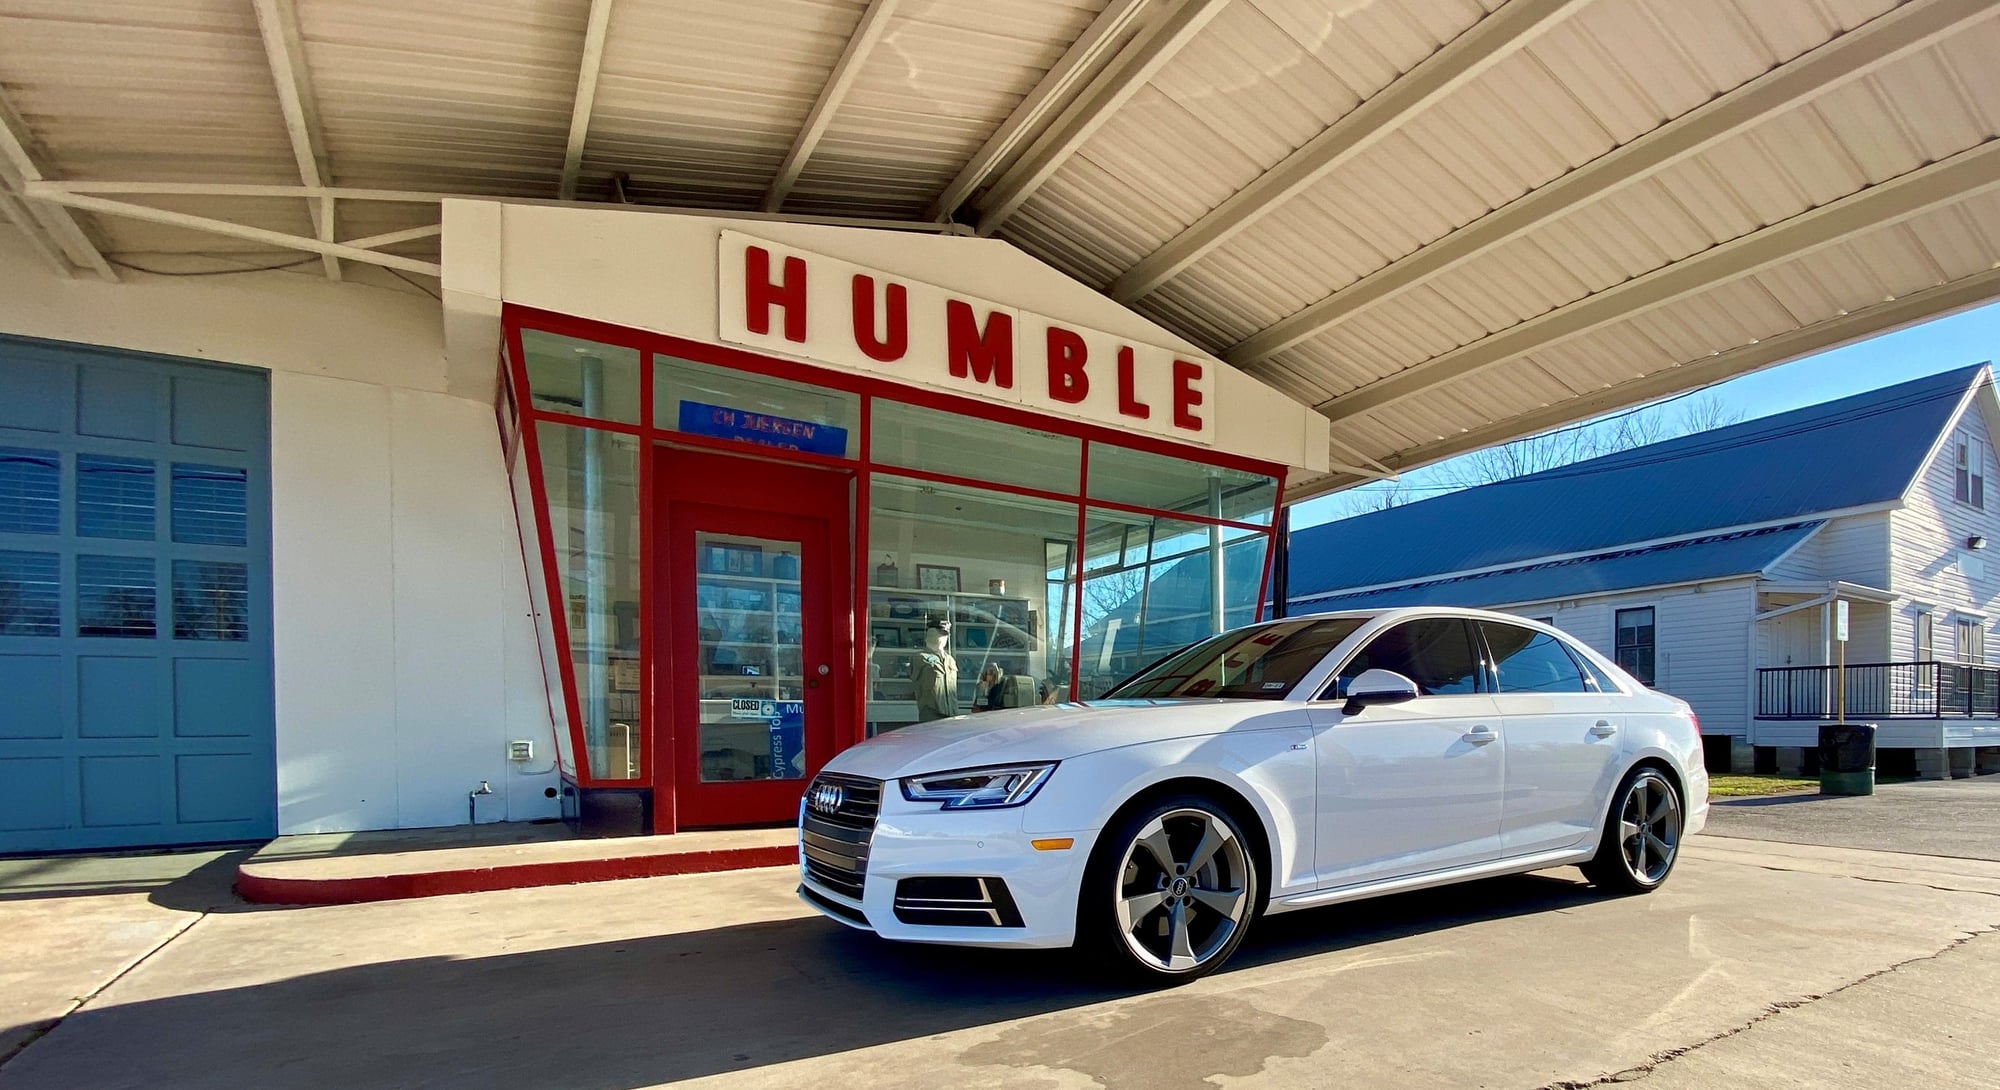 2017 Audi A4 Quattro - Rare 2017 Audi A4 Quattro 6-speed Manual for sale with only 4,800 miles! - Used - VIN WAUPNAF47HA178331 - 4,800 Miles - 4 cyl - 4WD - Manual - Sedan - White - Cypress, TX 77429, United States